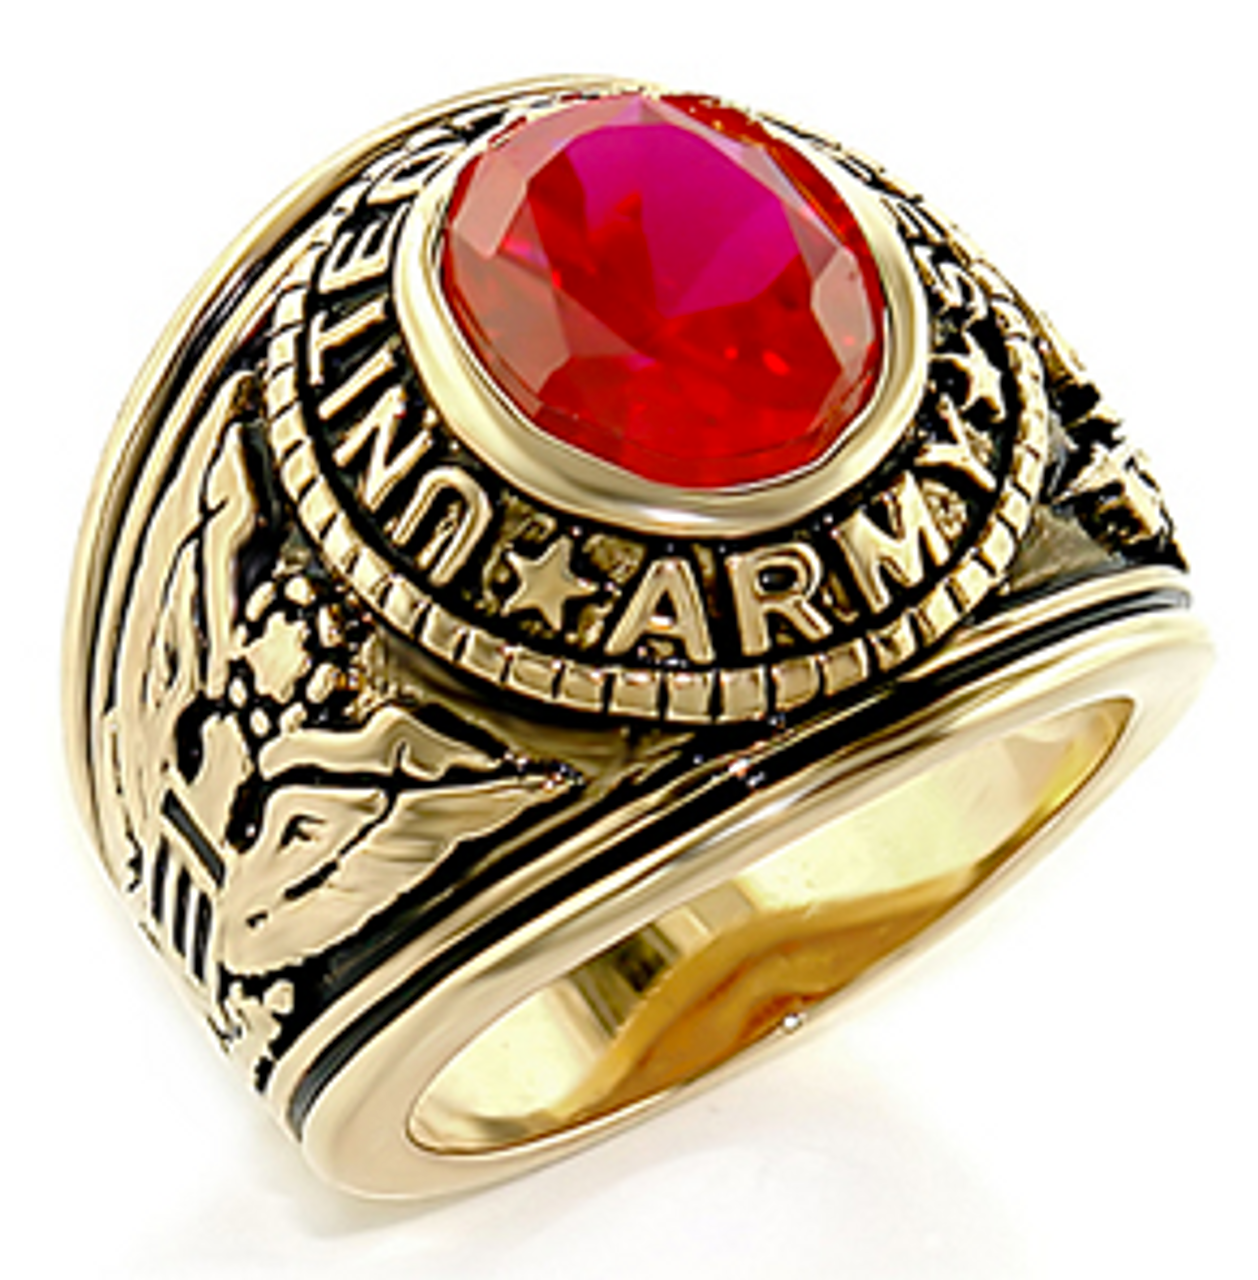 Army - U.S. Armed Forces Military Ring (Gold with Red Stone) 